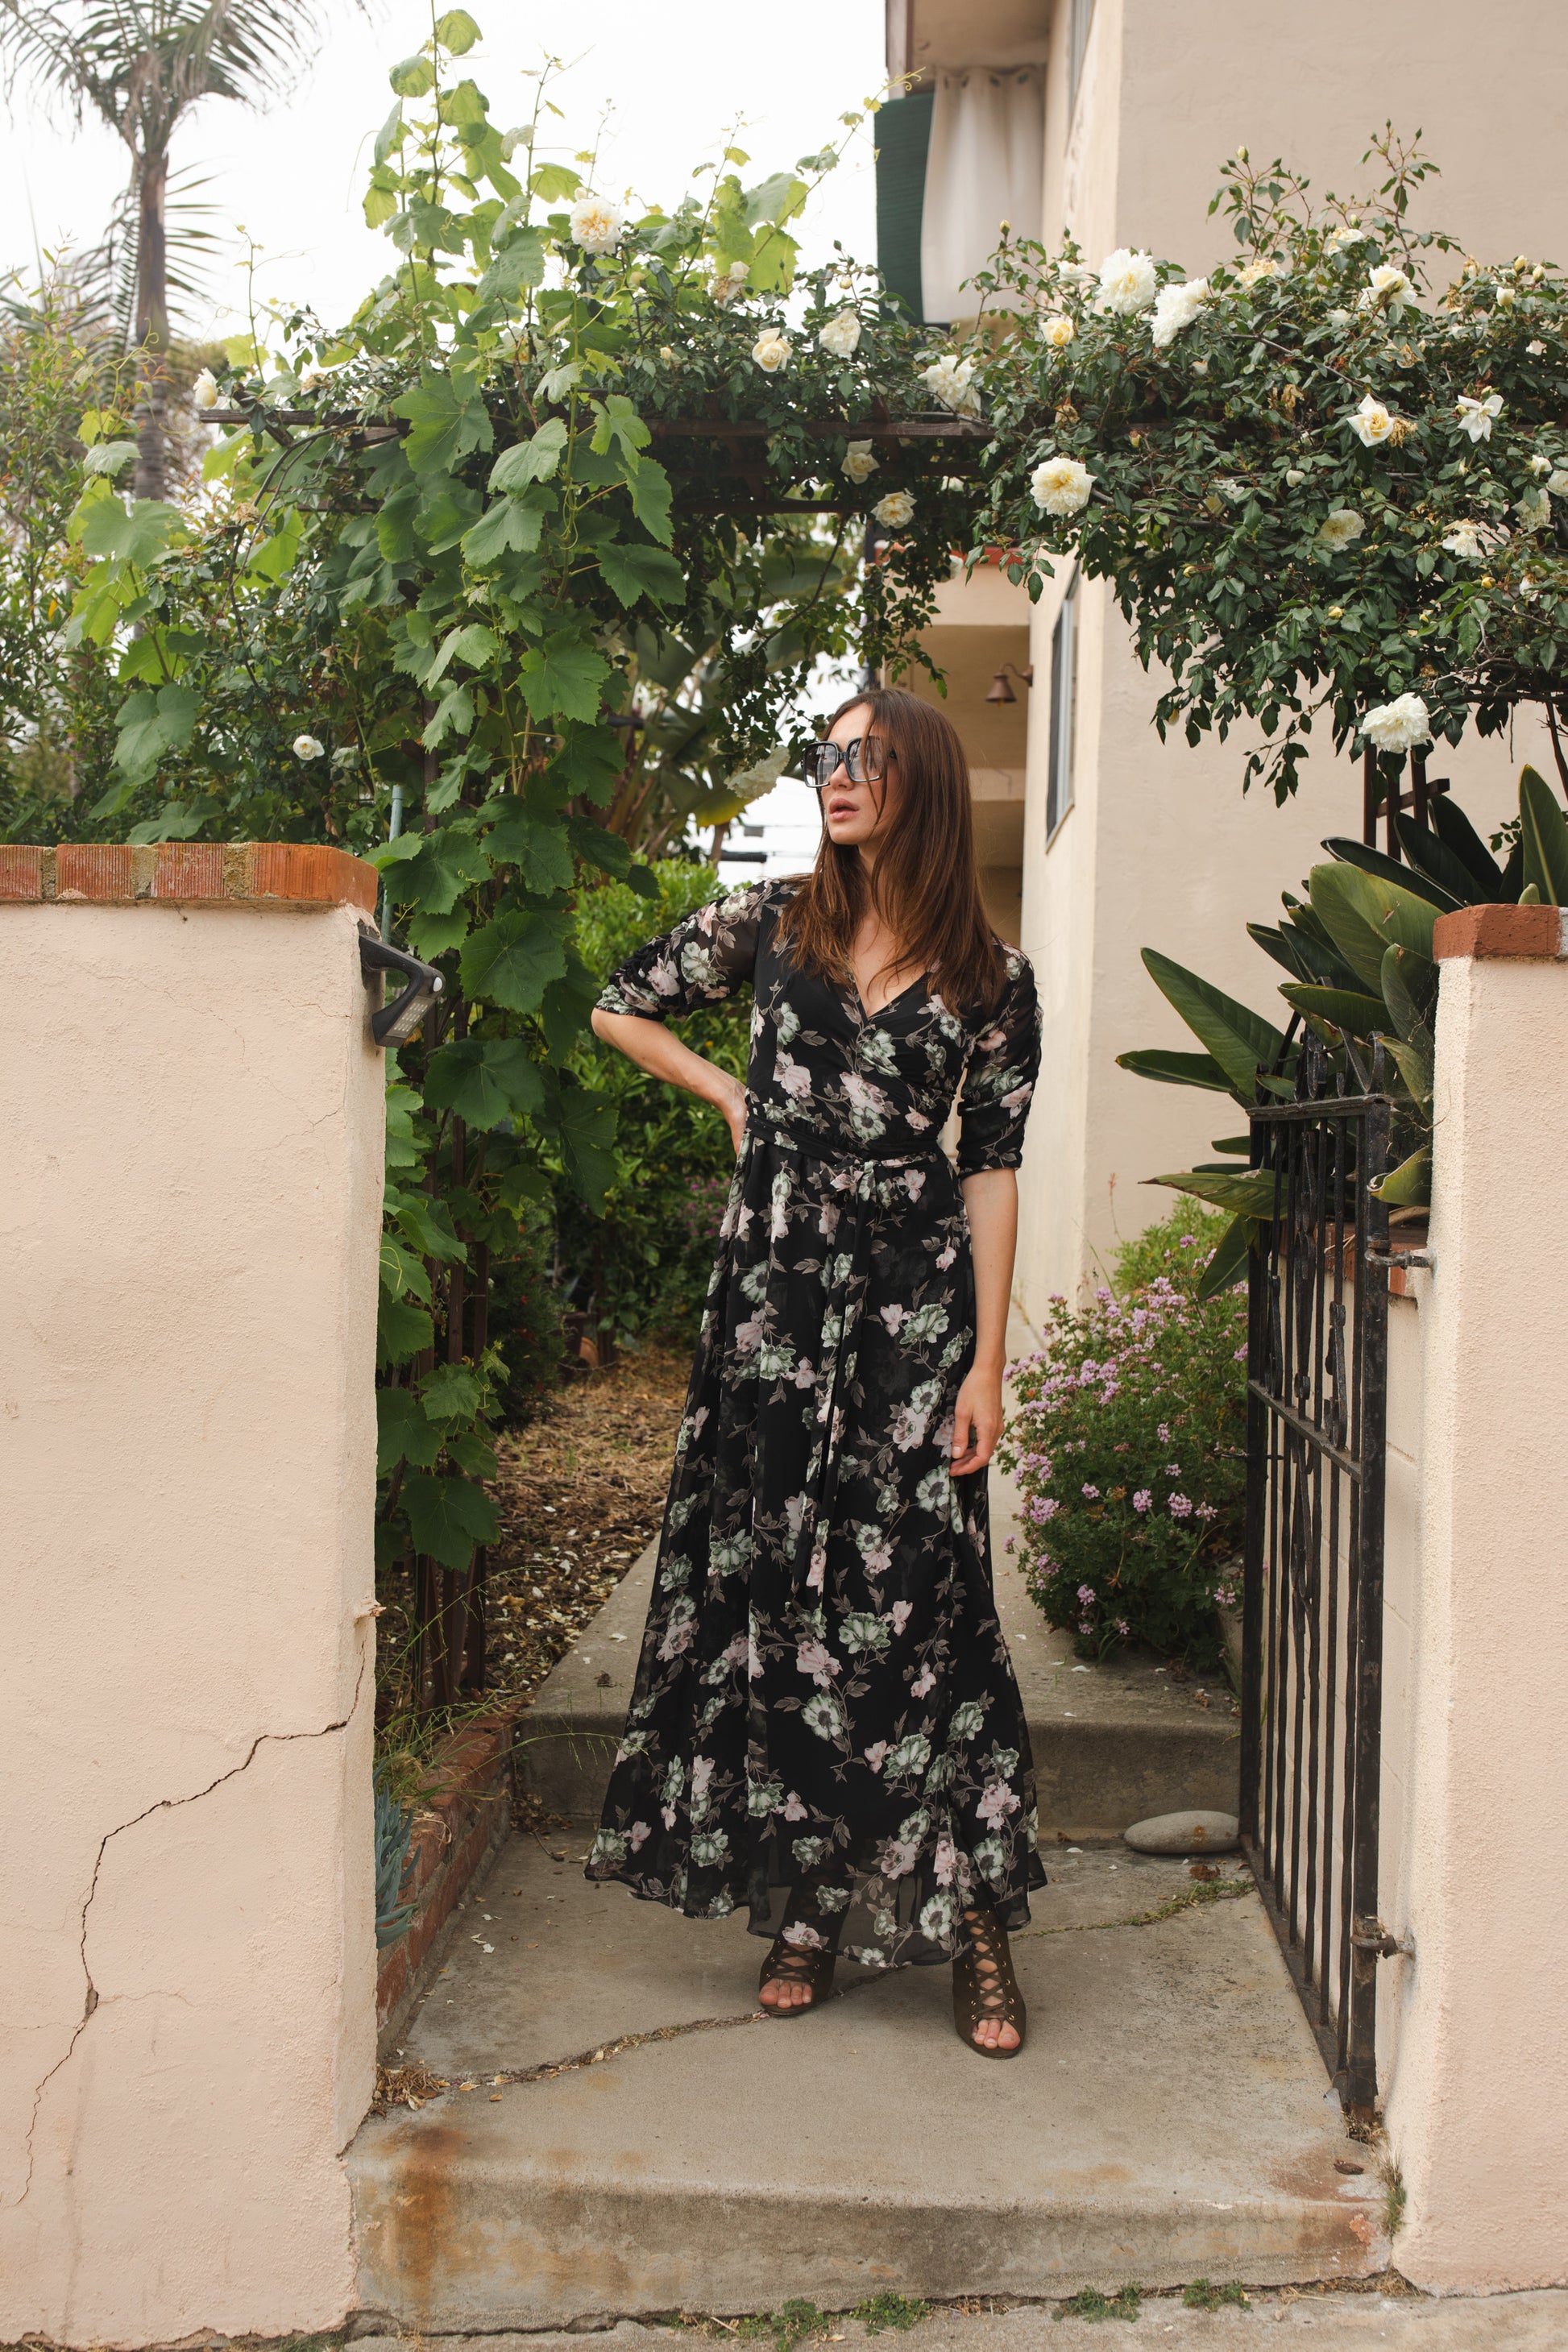 jennafer grace Signature Wrap Dress in Noir Garden onyx black maxi dress with pastel floral flower print with long waist tie and ruched sleeves boho bohemian hippie romantic whimsical spring gown wedding guest dress unisex handmade